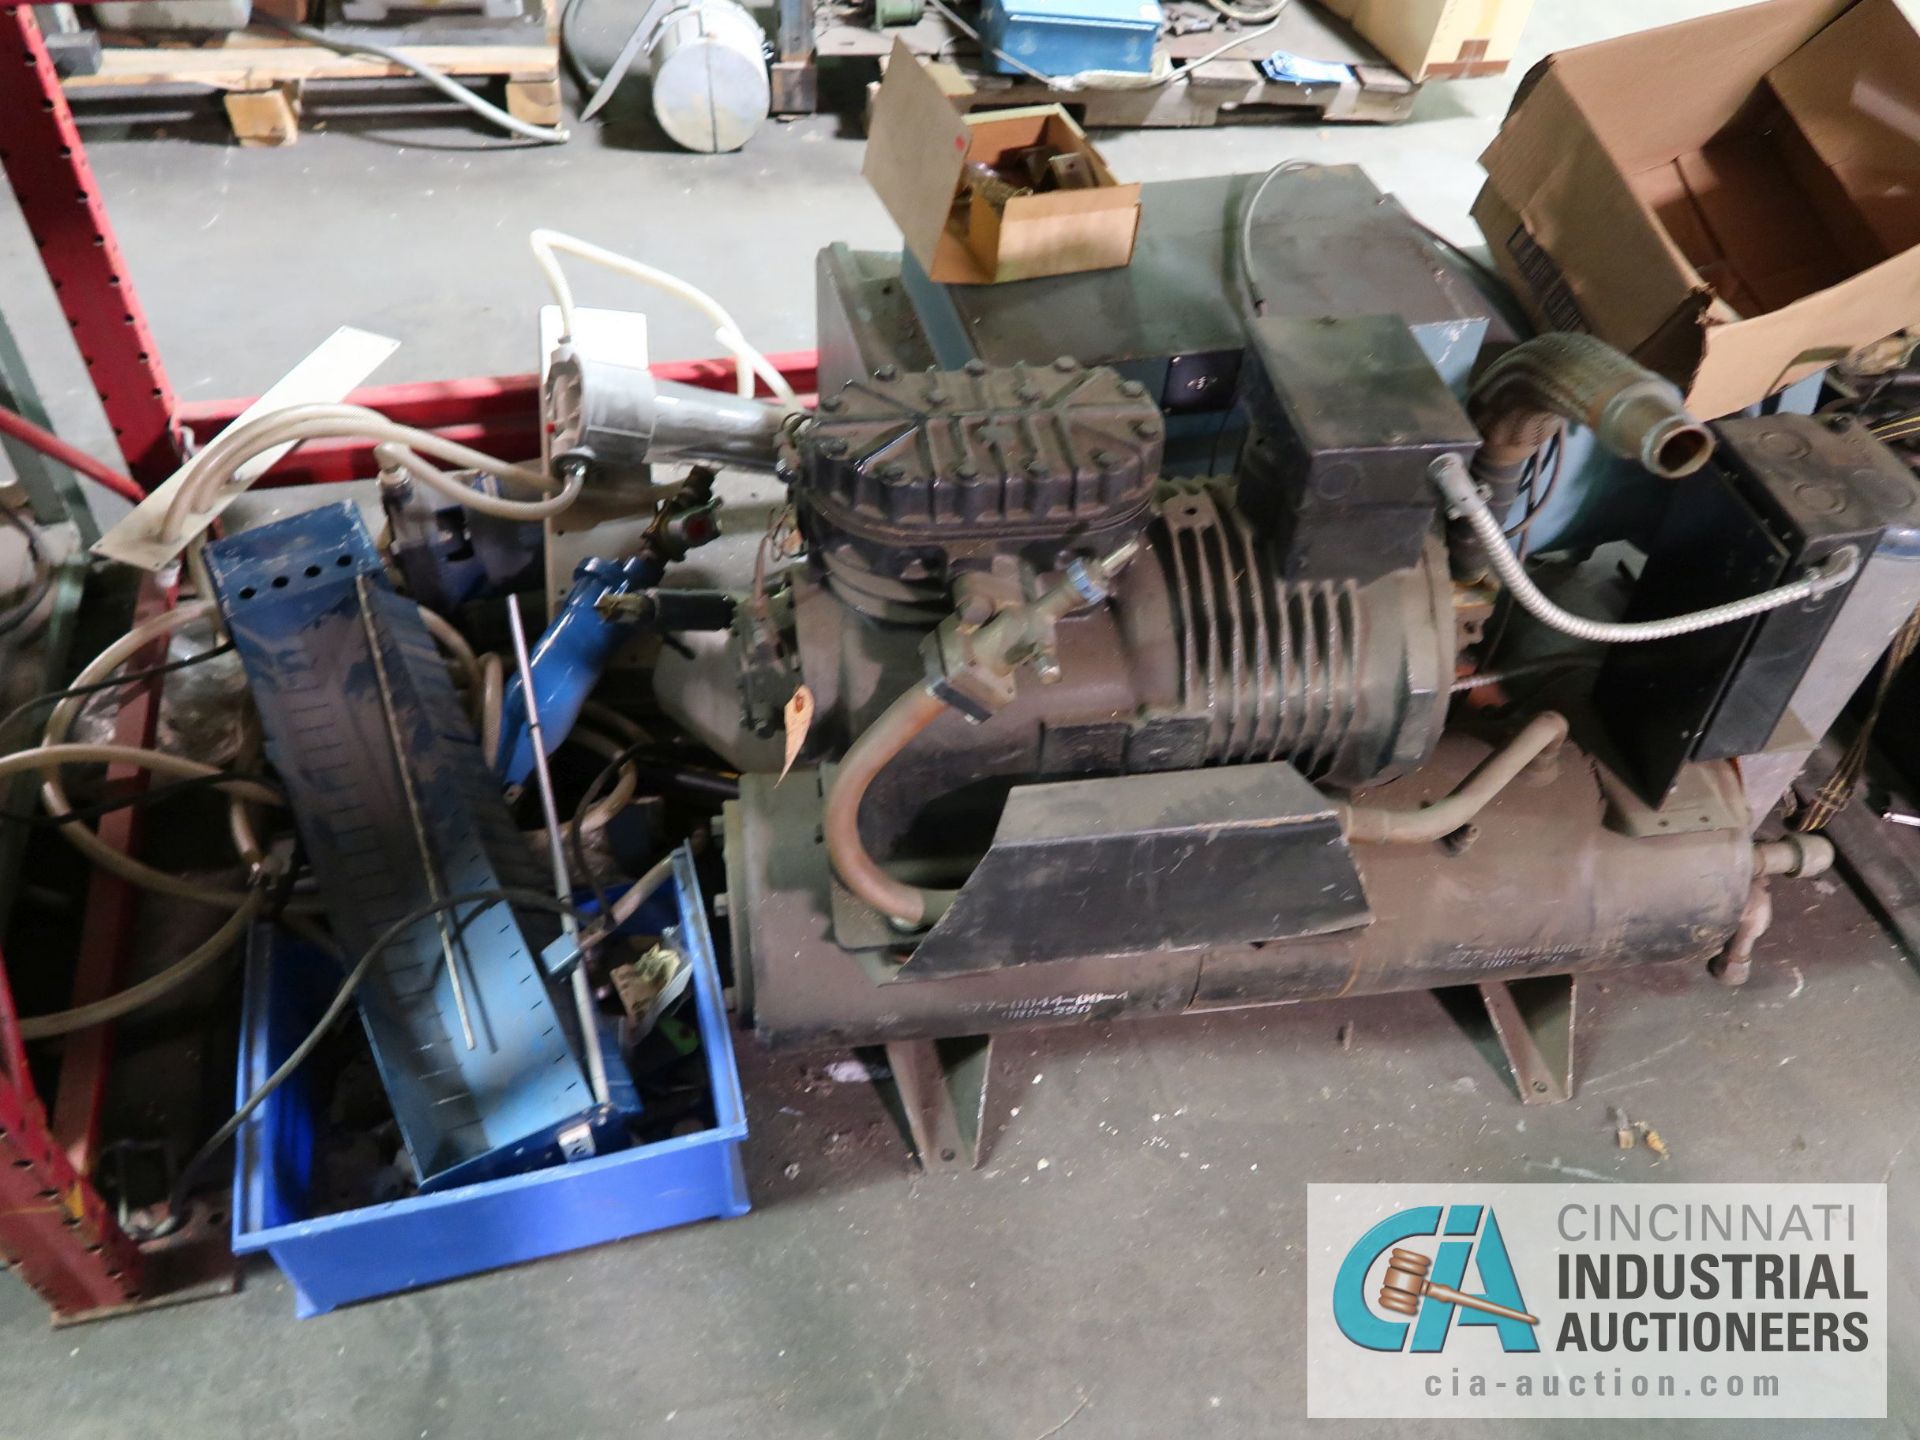 (LOT) MACHINE PARTS, COMPRESSORS, REDUCERS, GEARS, MOTORS, AND OTHER (4) SECTIONS RACK - Image 5 of 28